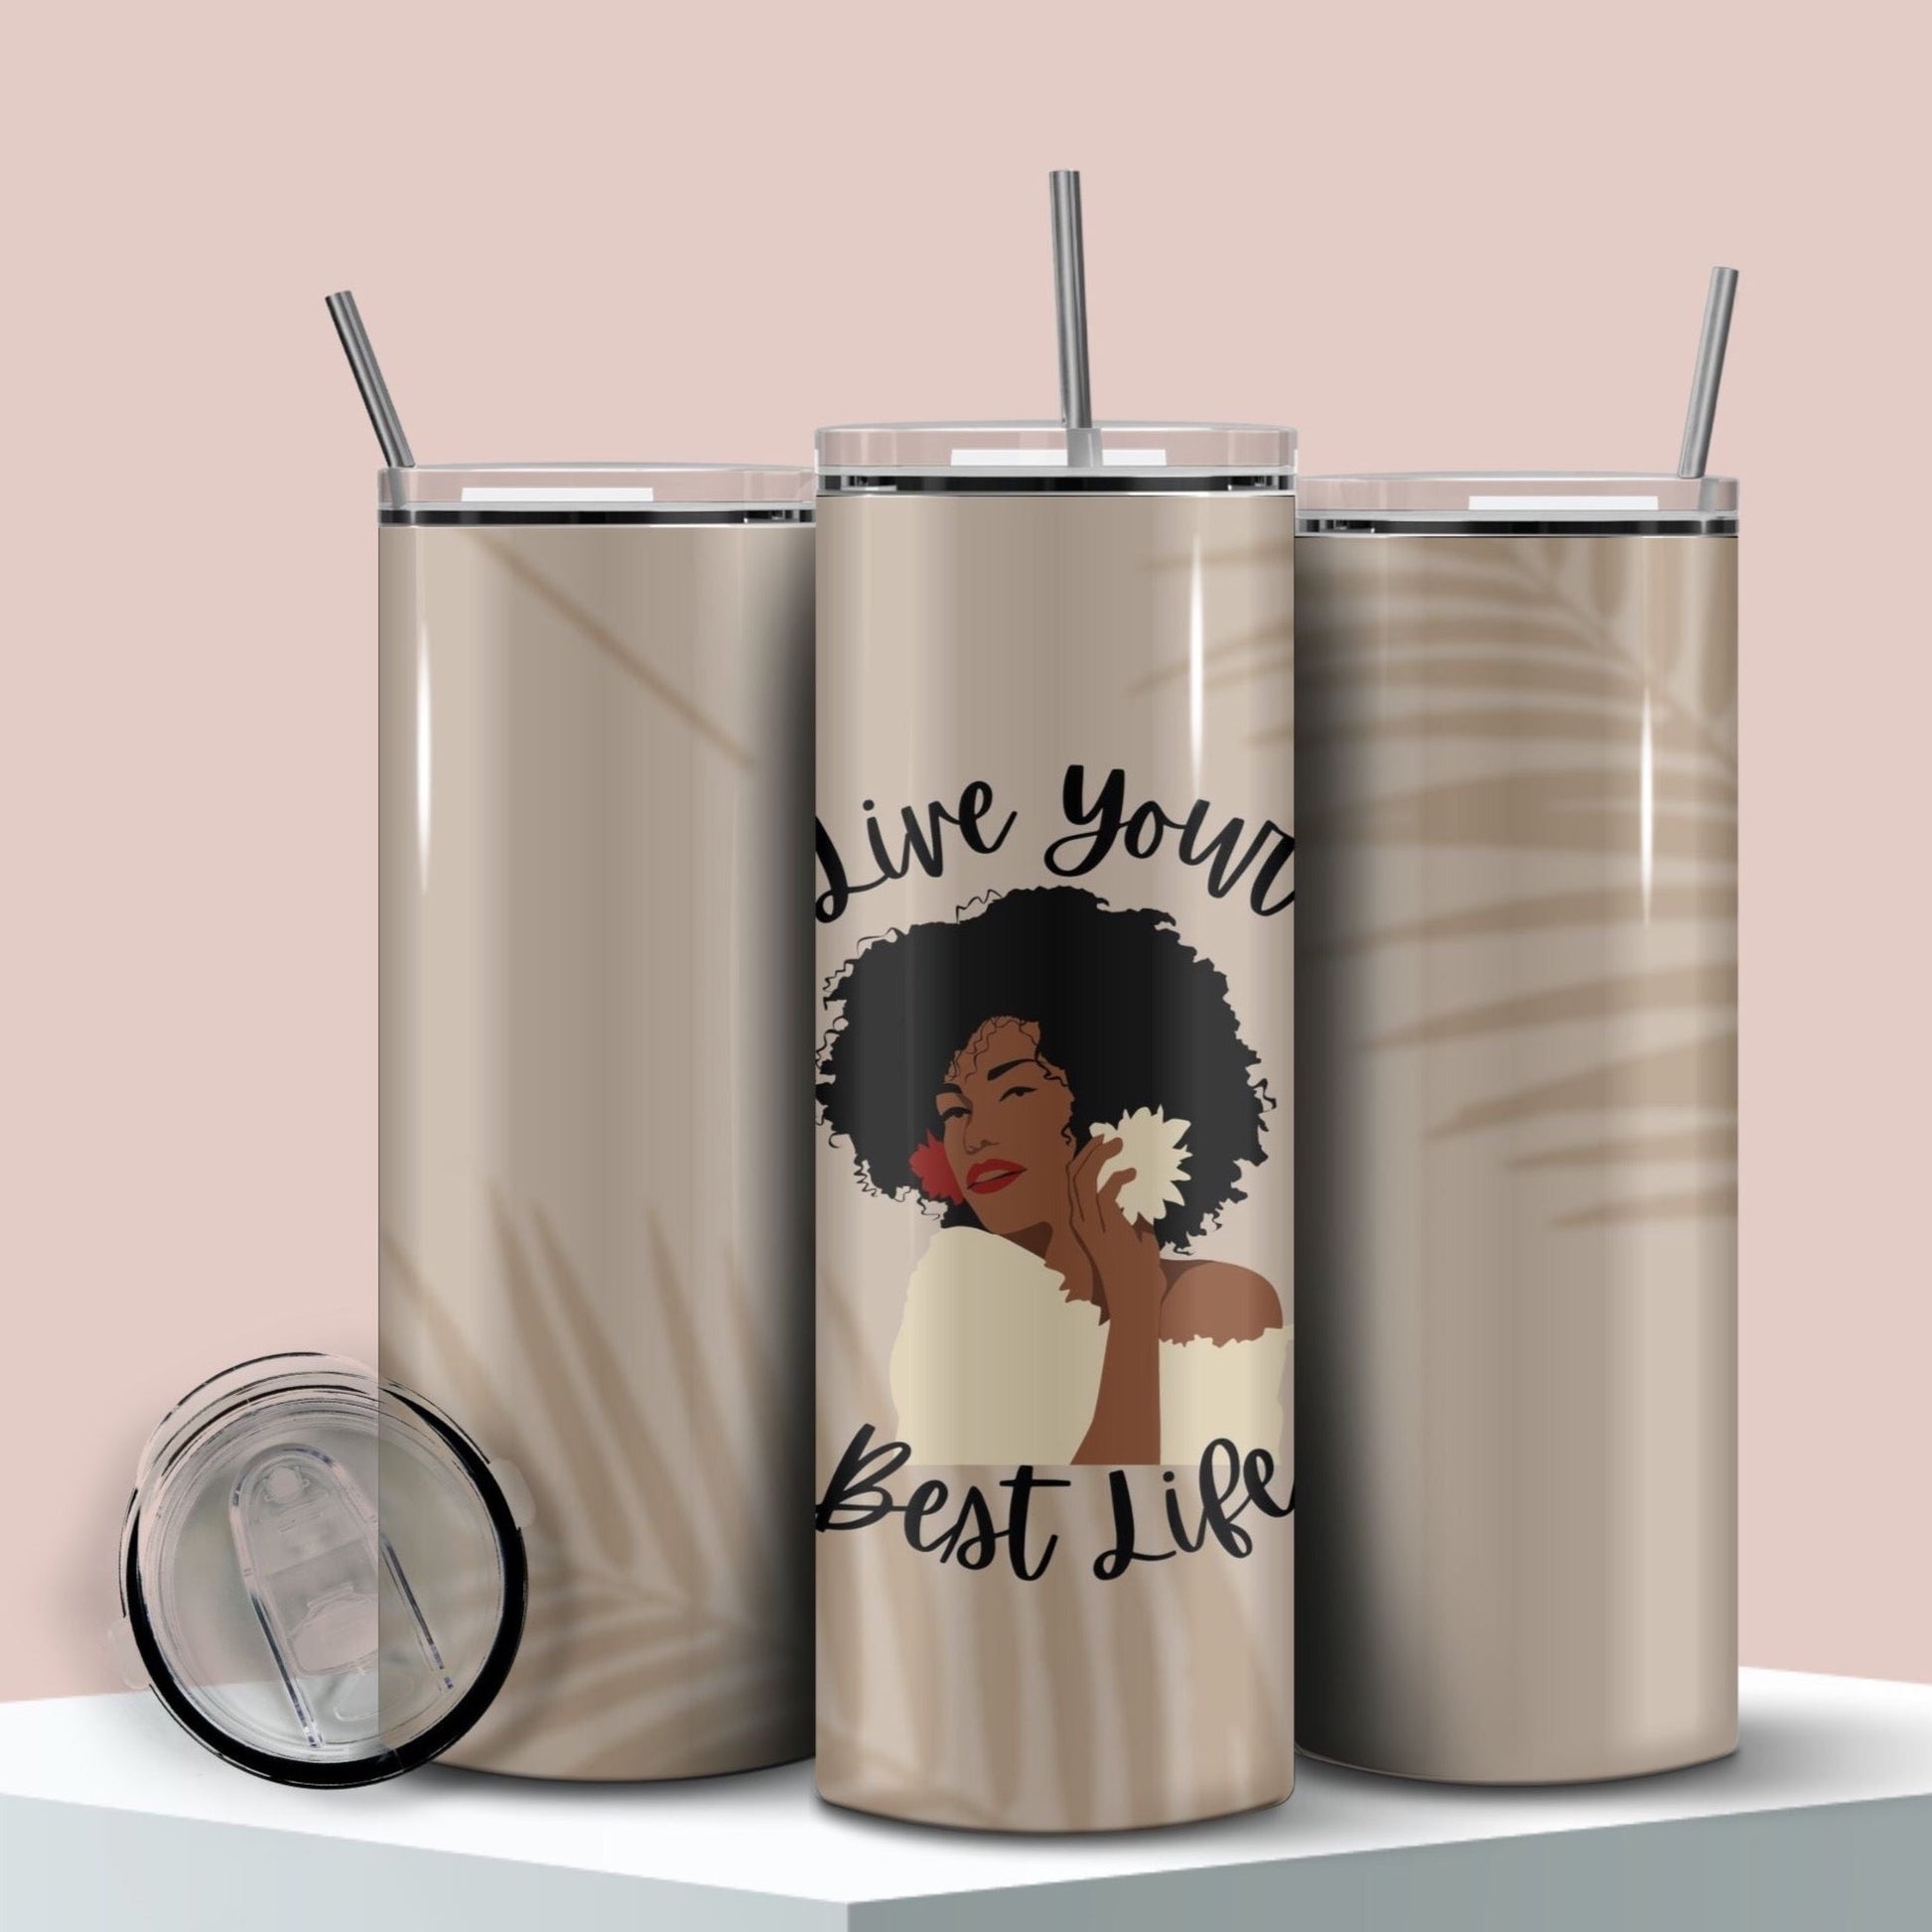 Live Your Best Life Tumbler for Black Woman, Cute Travel Coffee Cup with Positive AFfirmation